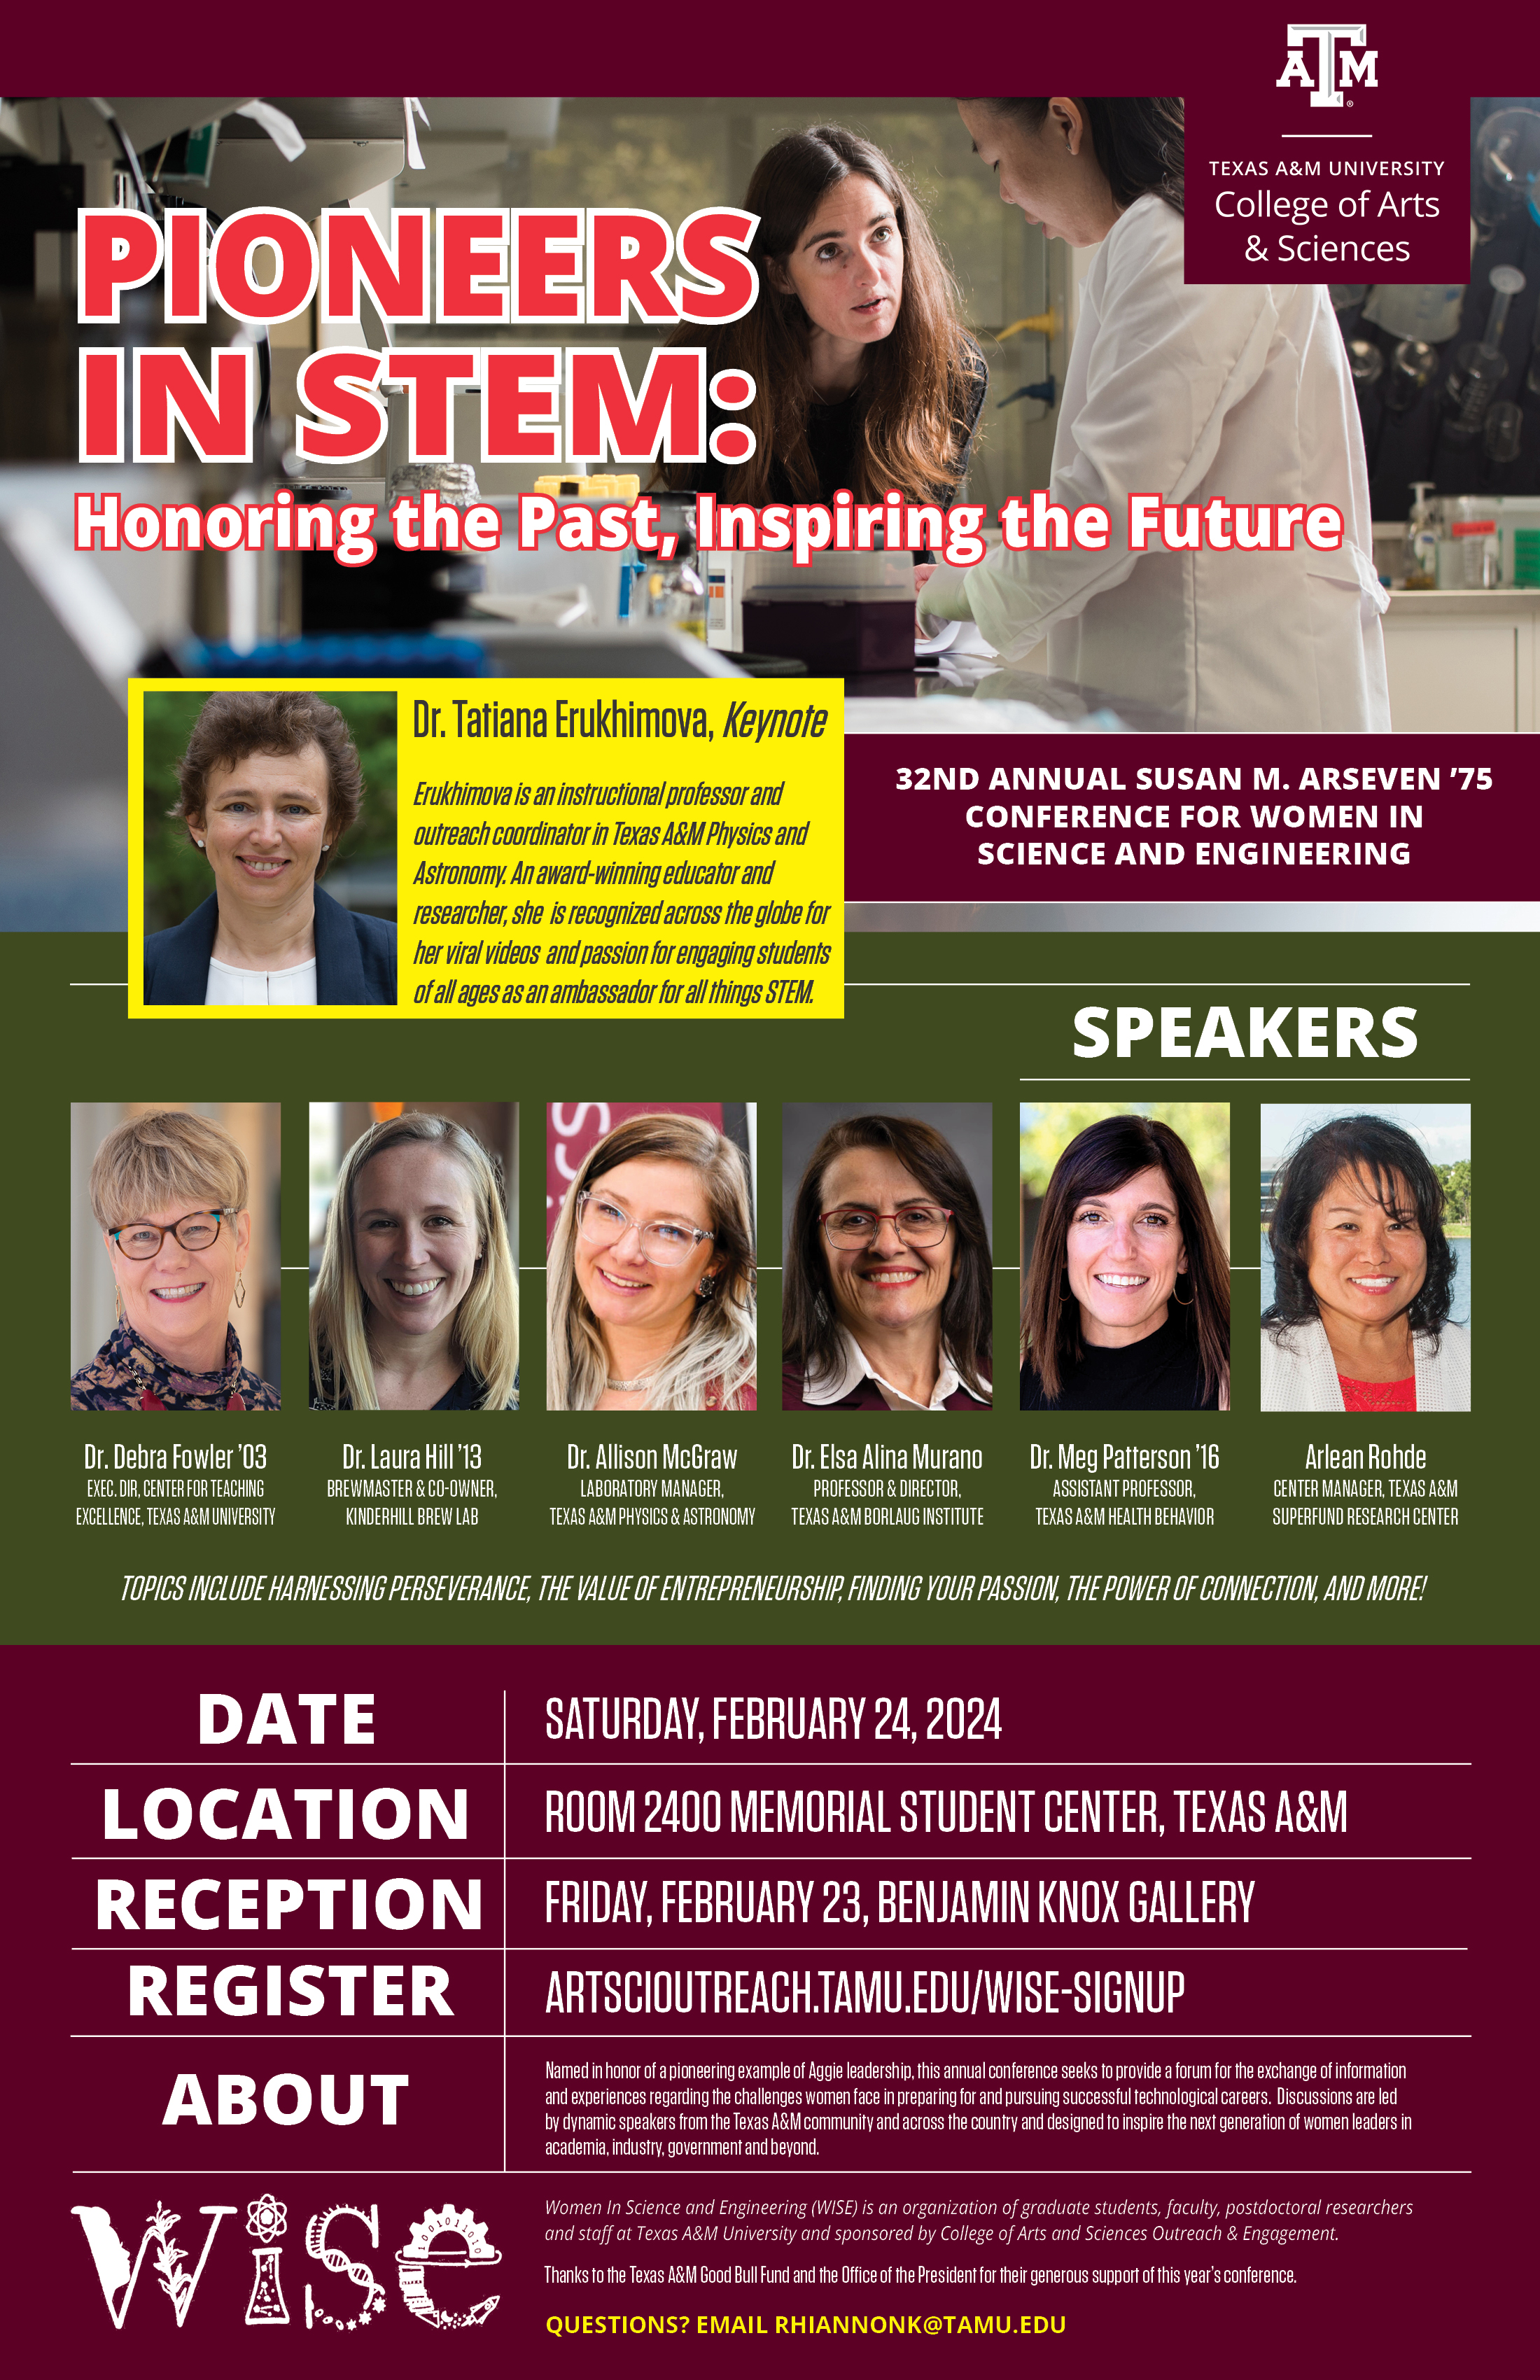 Poster promoting the 2024 Susan M. Arseven '75 Women In Science and Engineering Conference